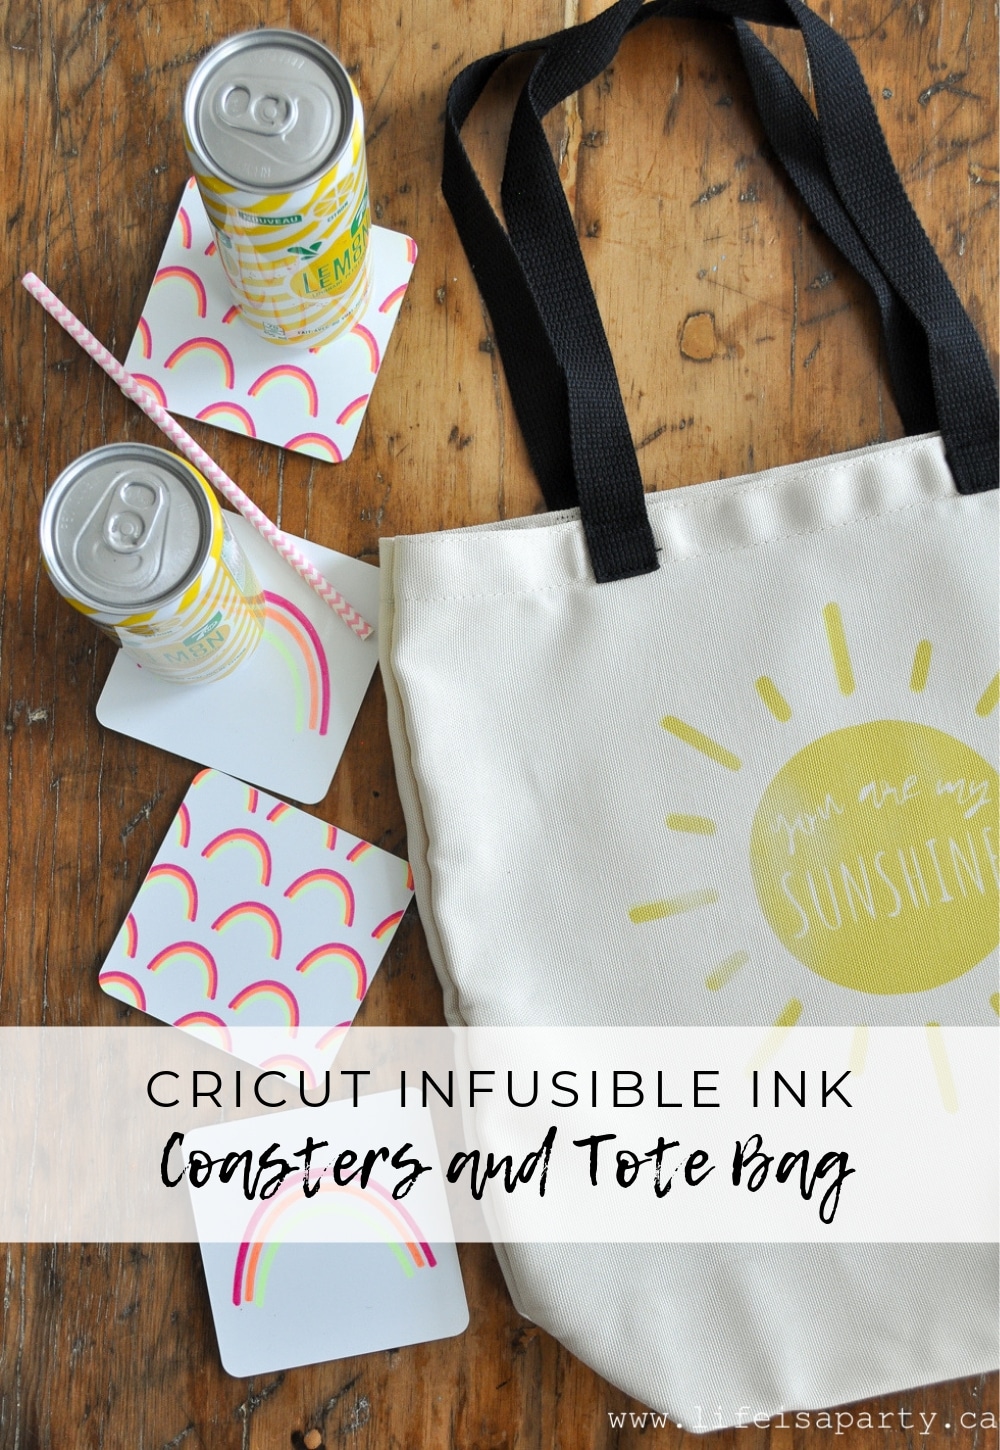 Cricut Infusible Ink Ideas for Coasters and Tote Bag: create a "you are my sunshine" tote bag, or rainbow coasters with Cricut's new Infusible Ink.